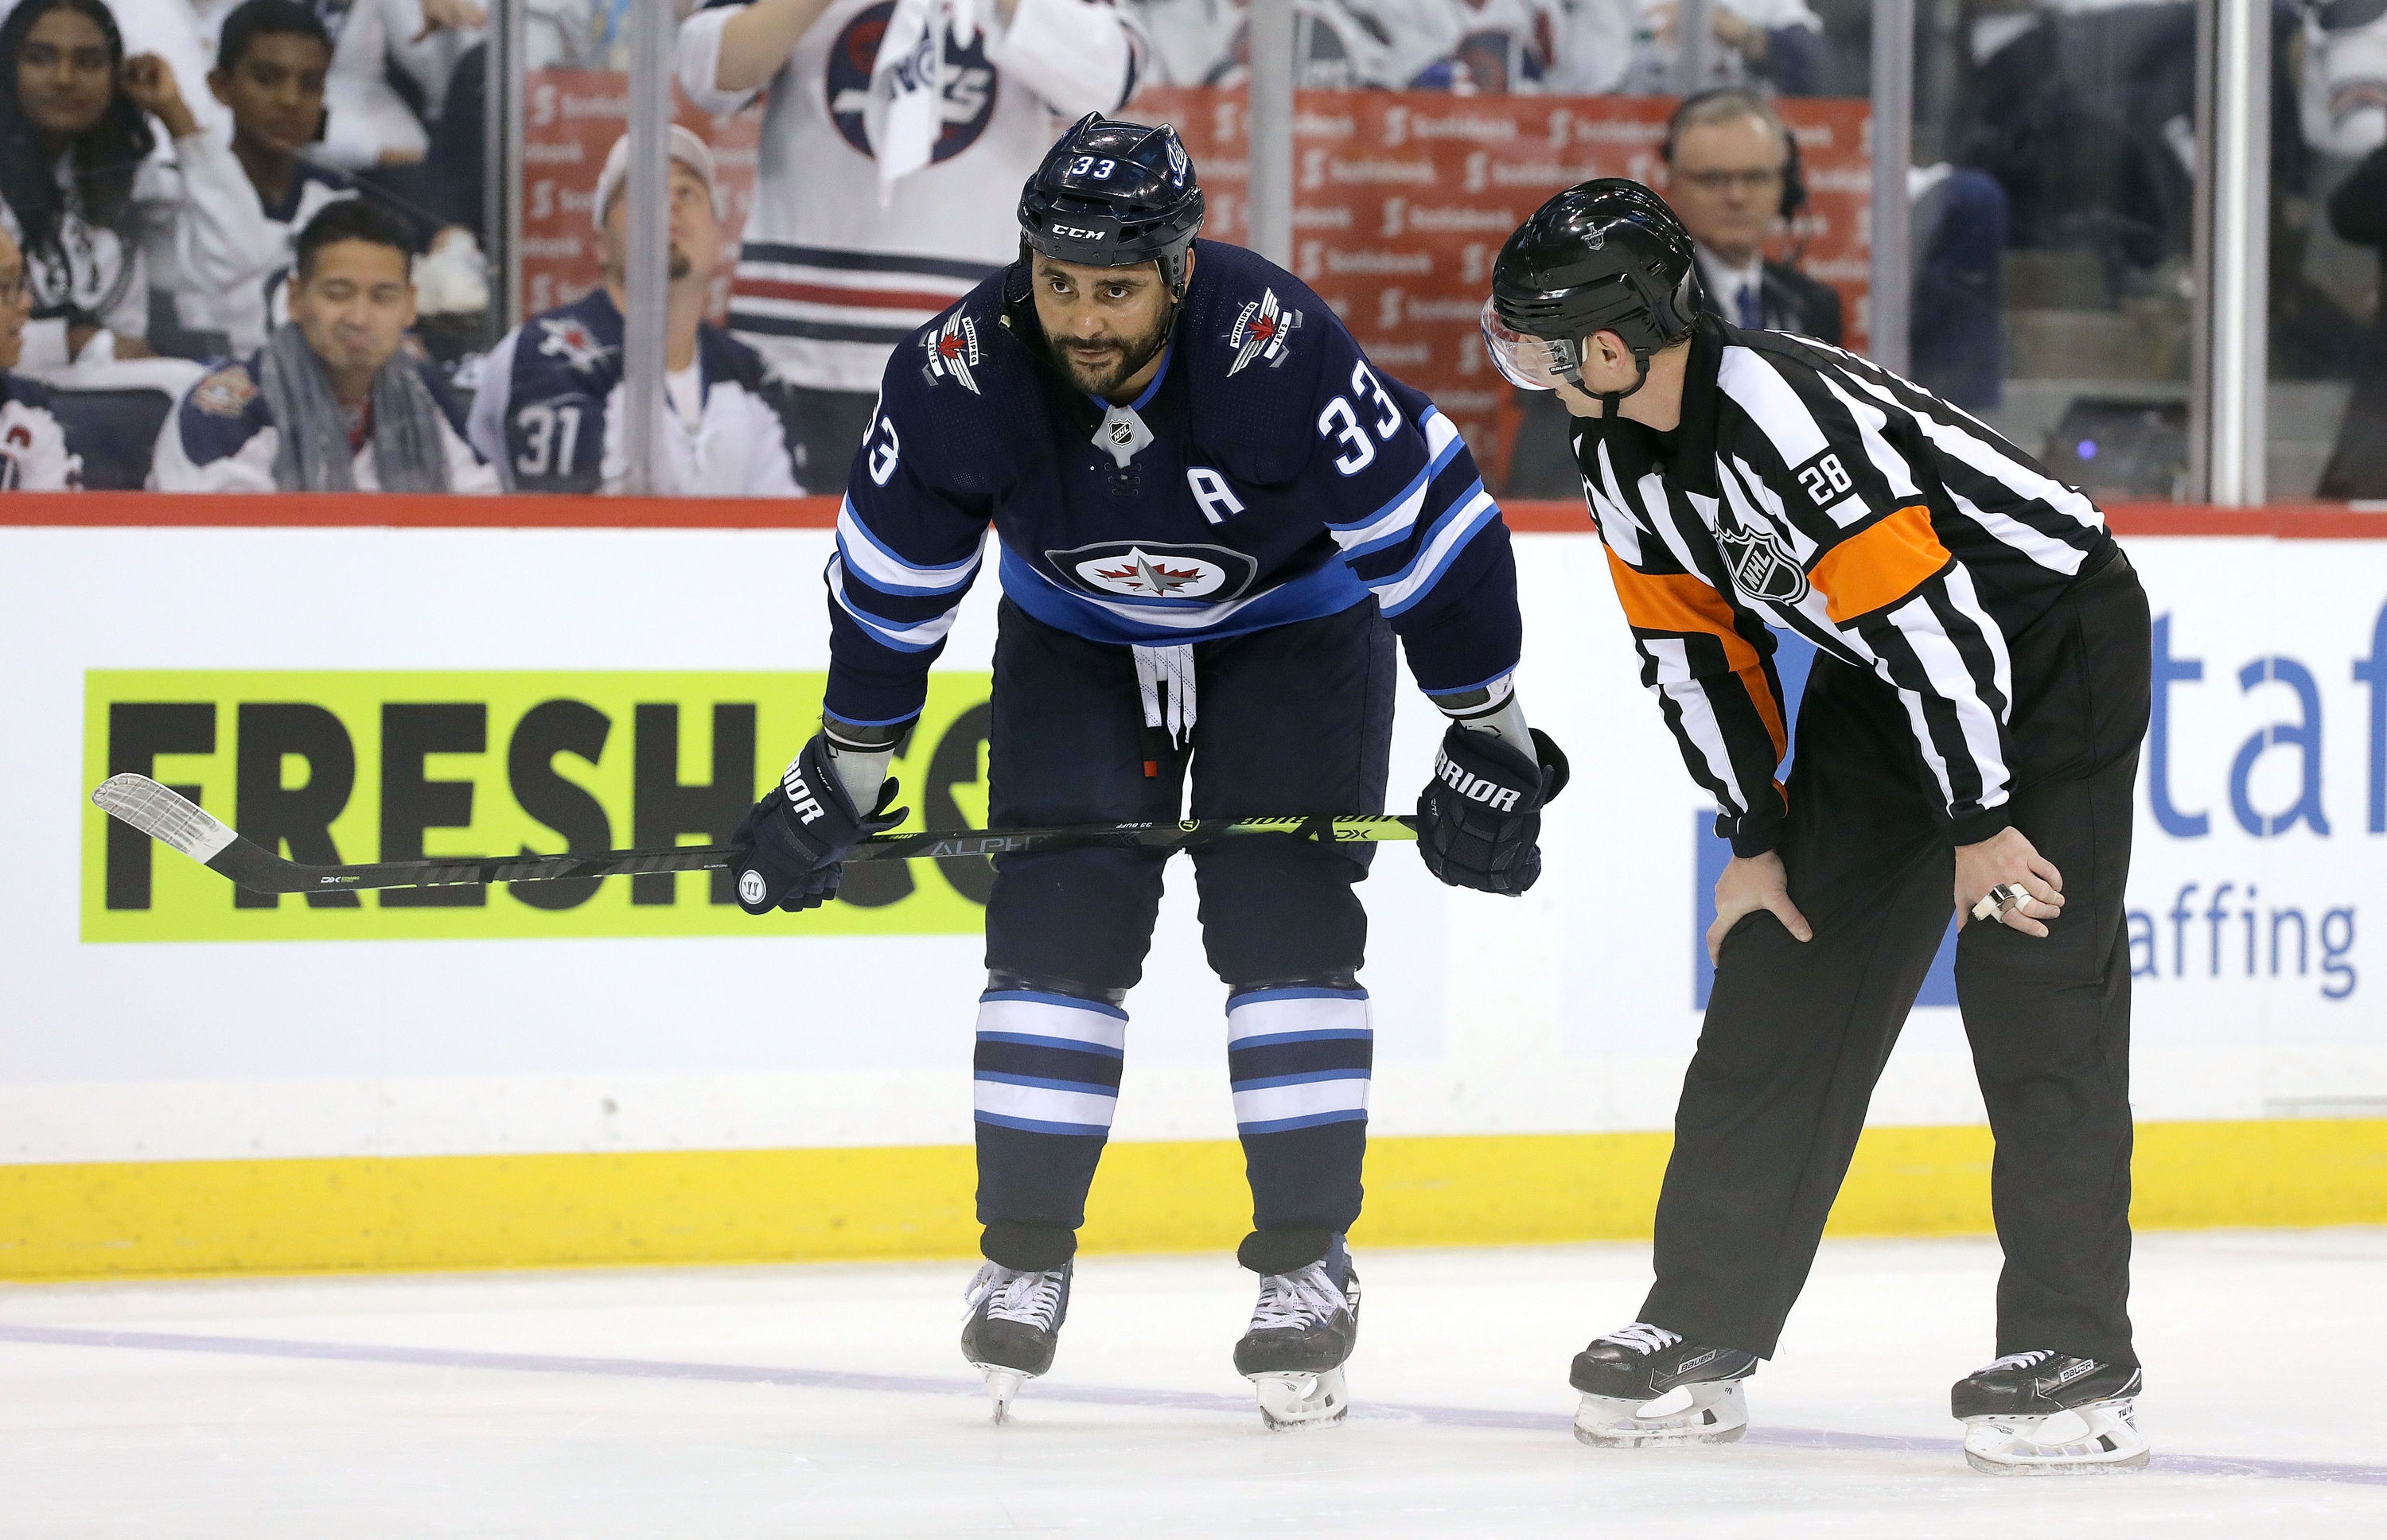 Report: Jets, Byfuglien likely headed to arbitration